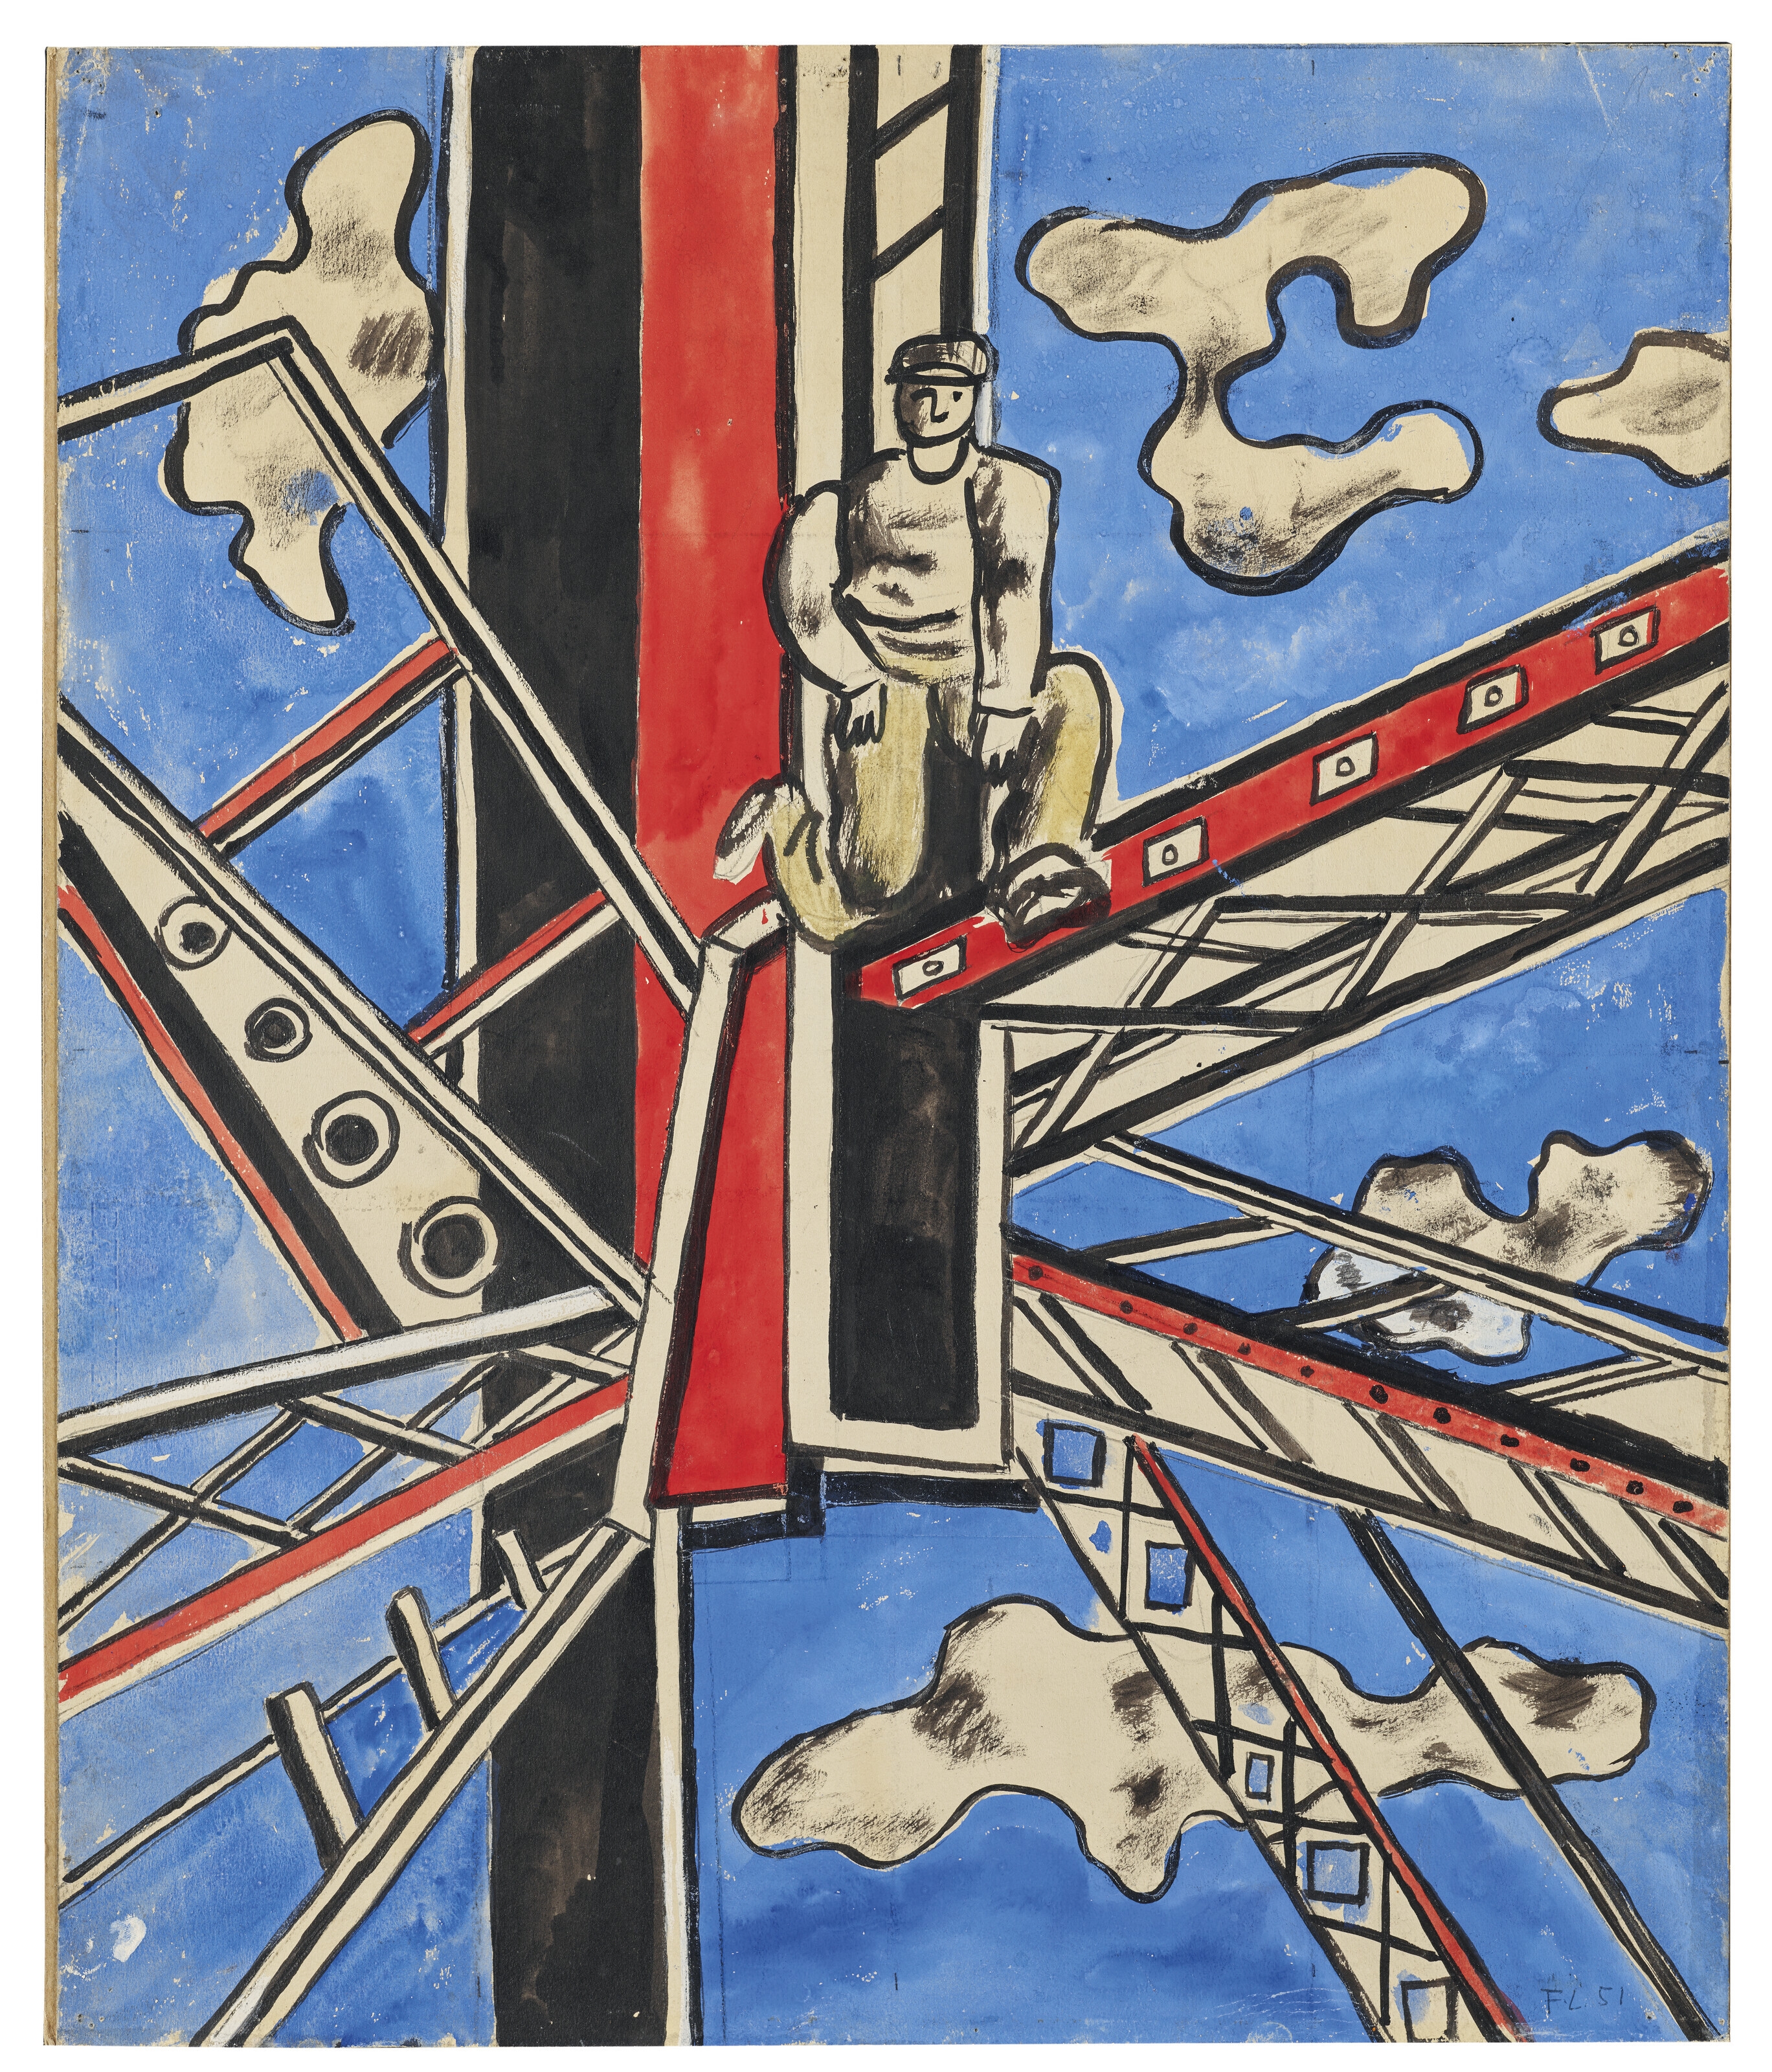 Artwork by Fernand Léger, Étude pour "Les Constructeurs", Made of gouache, brush and India ink and traces of pencil on paper